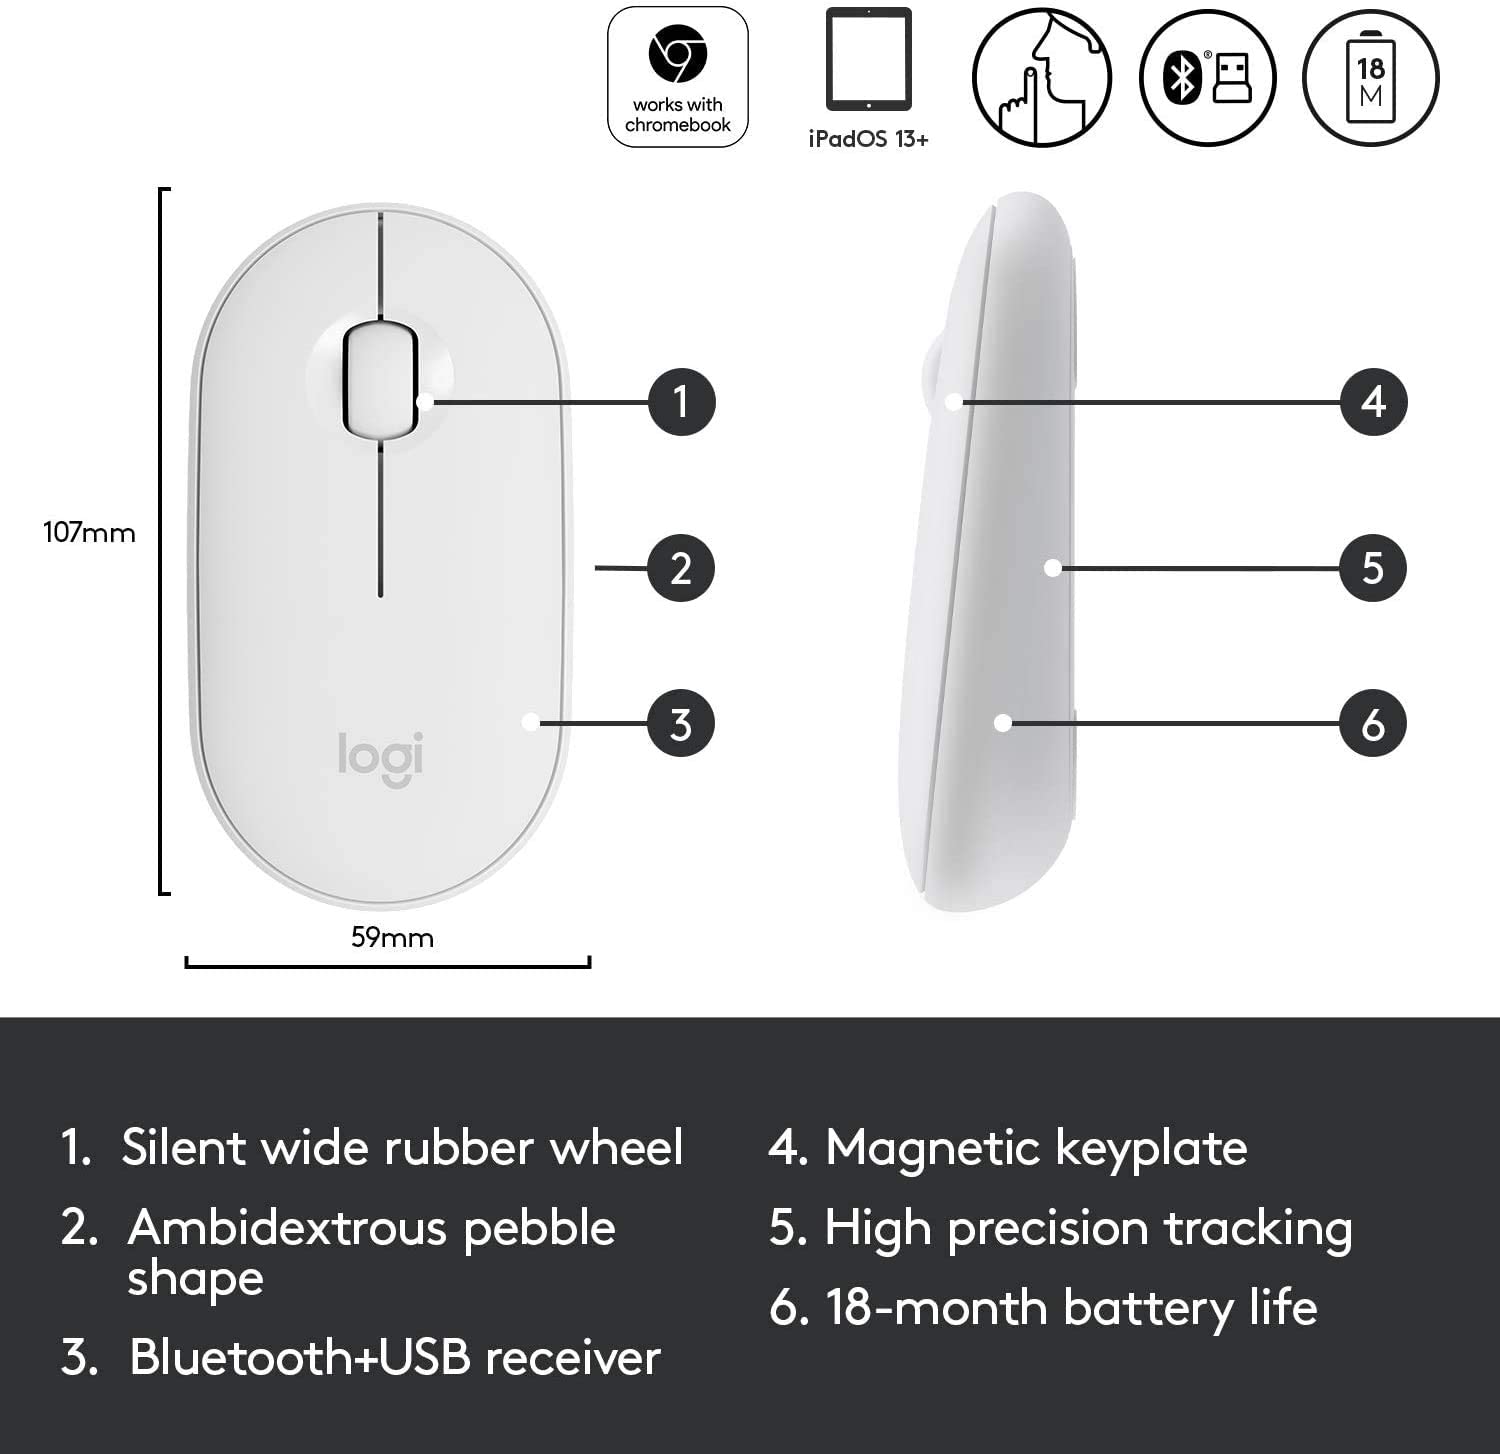 prosenter mouse for mac and windows duel computers